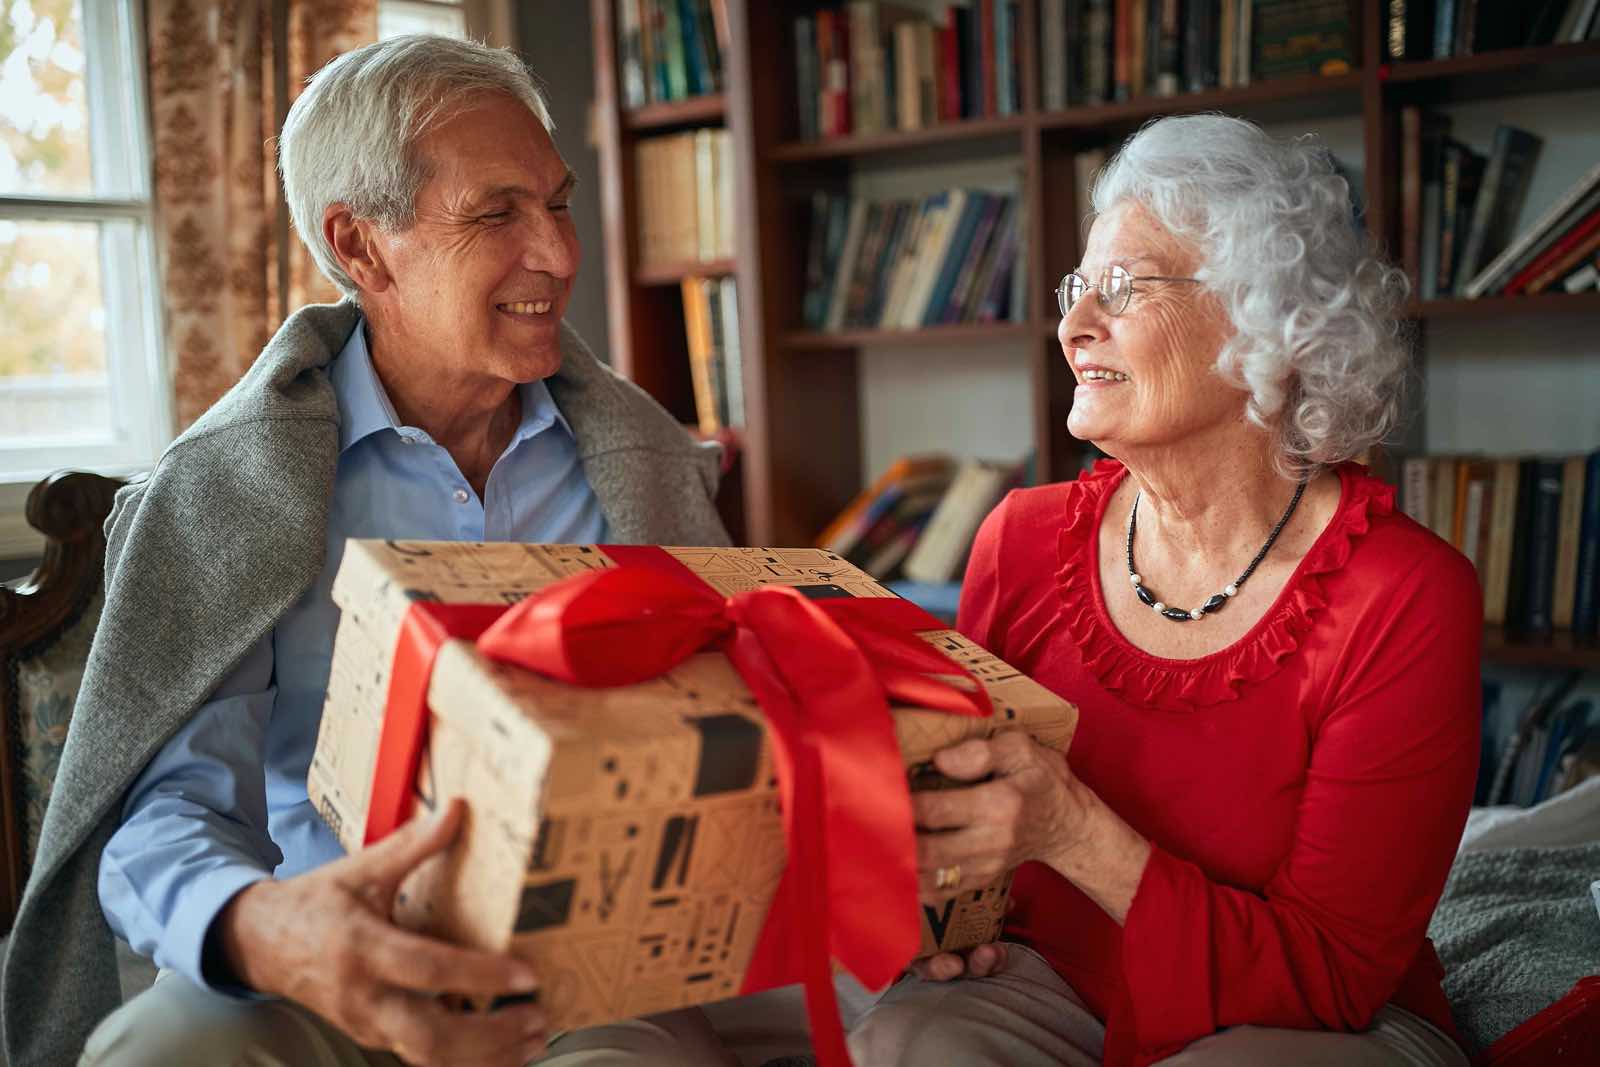 Ten Gift Cards For the Elderly For Anything That They Might Need